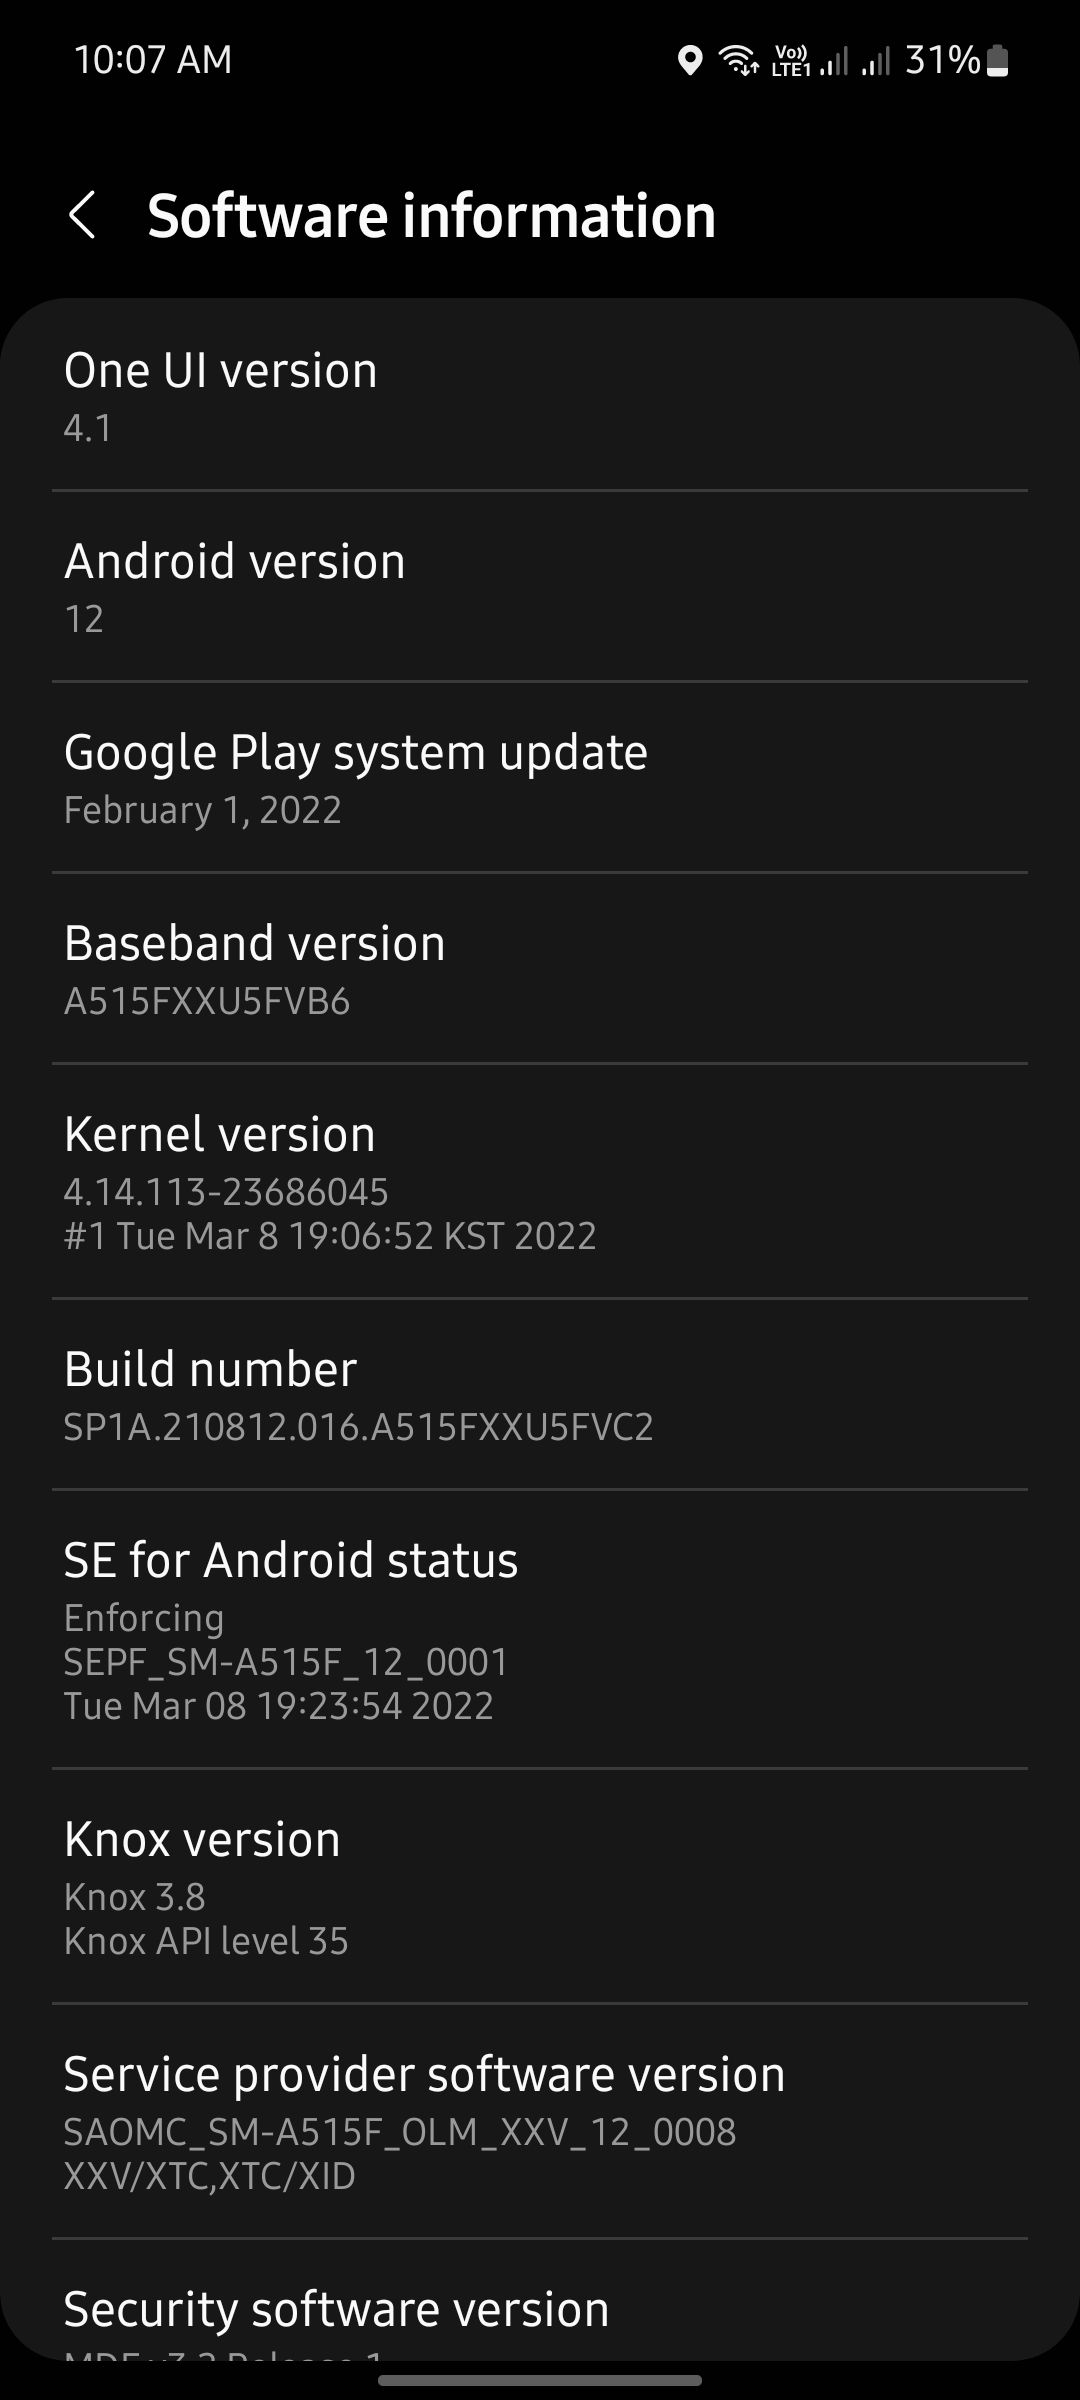 Galaxy A51: One UI 4.1 (Android 12) update - Samsung Members